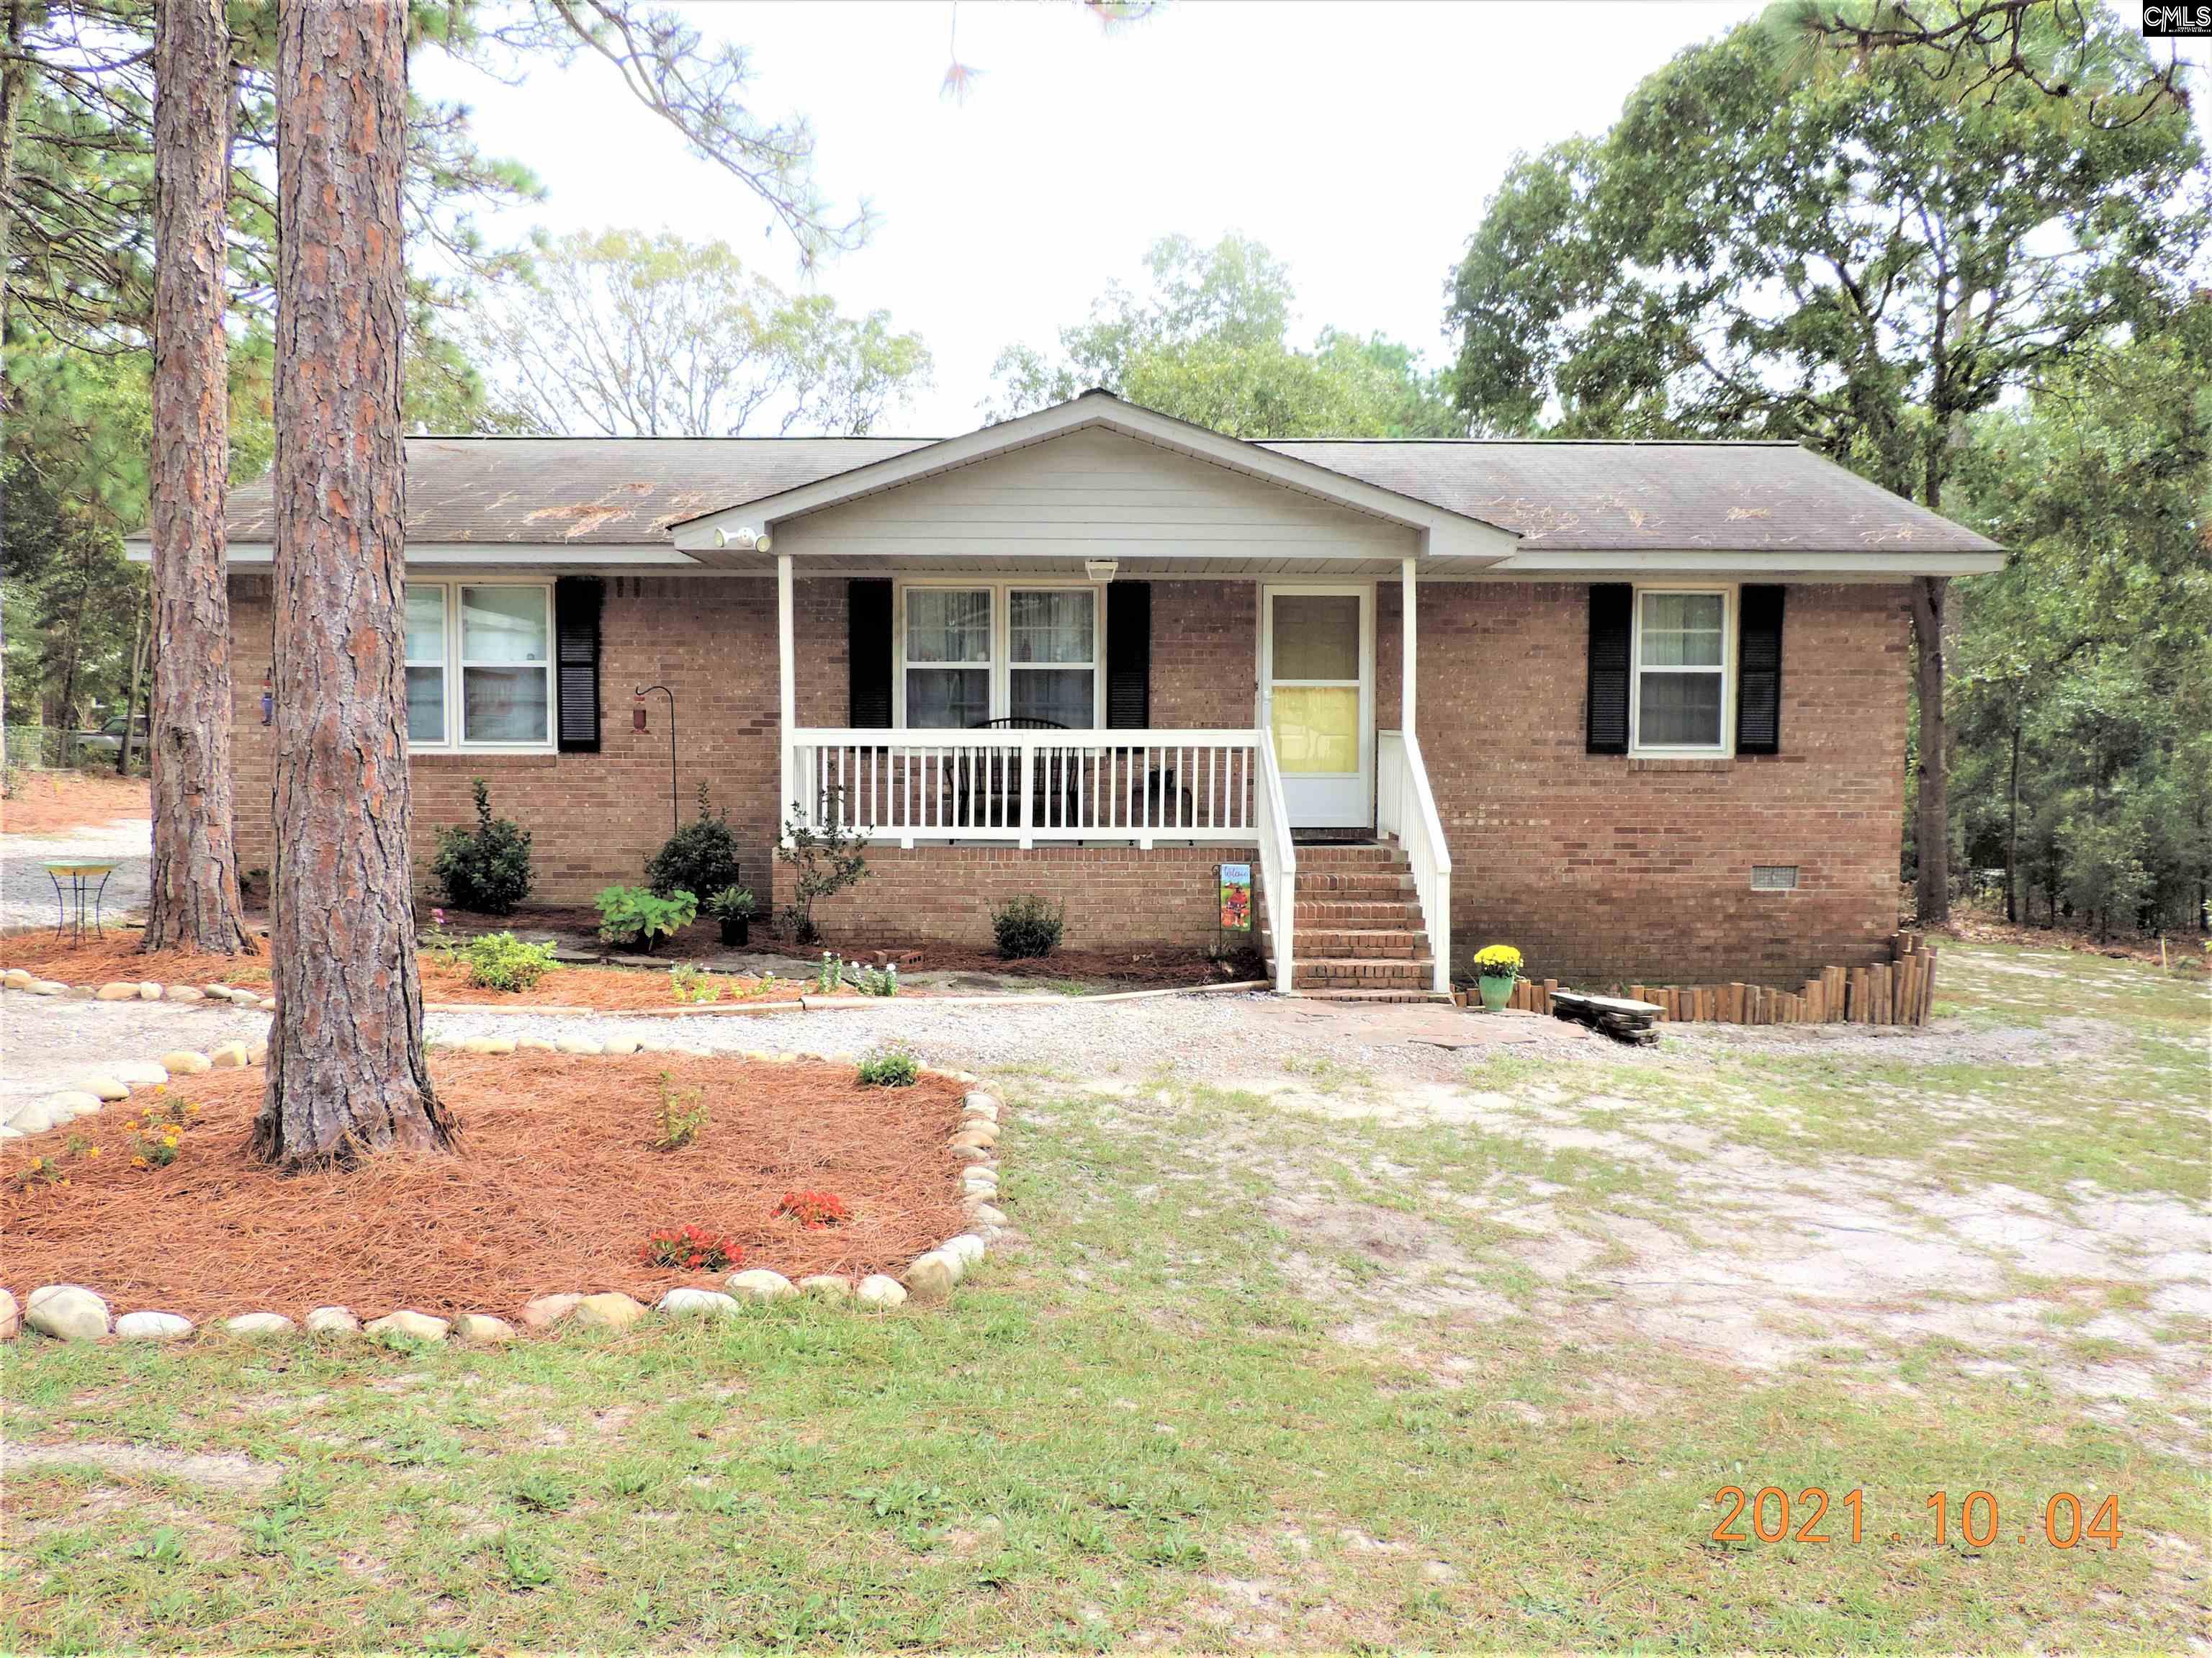 134 Kinghill Drive West Columbia, SC 29172